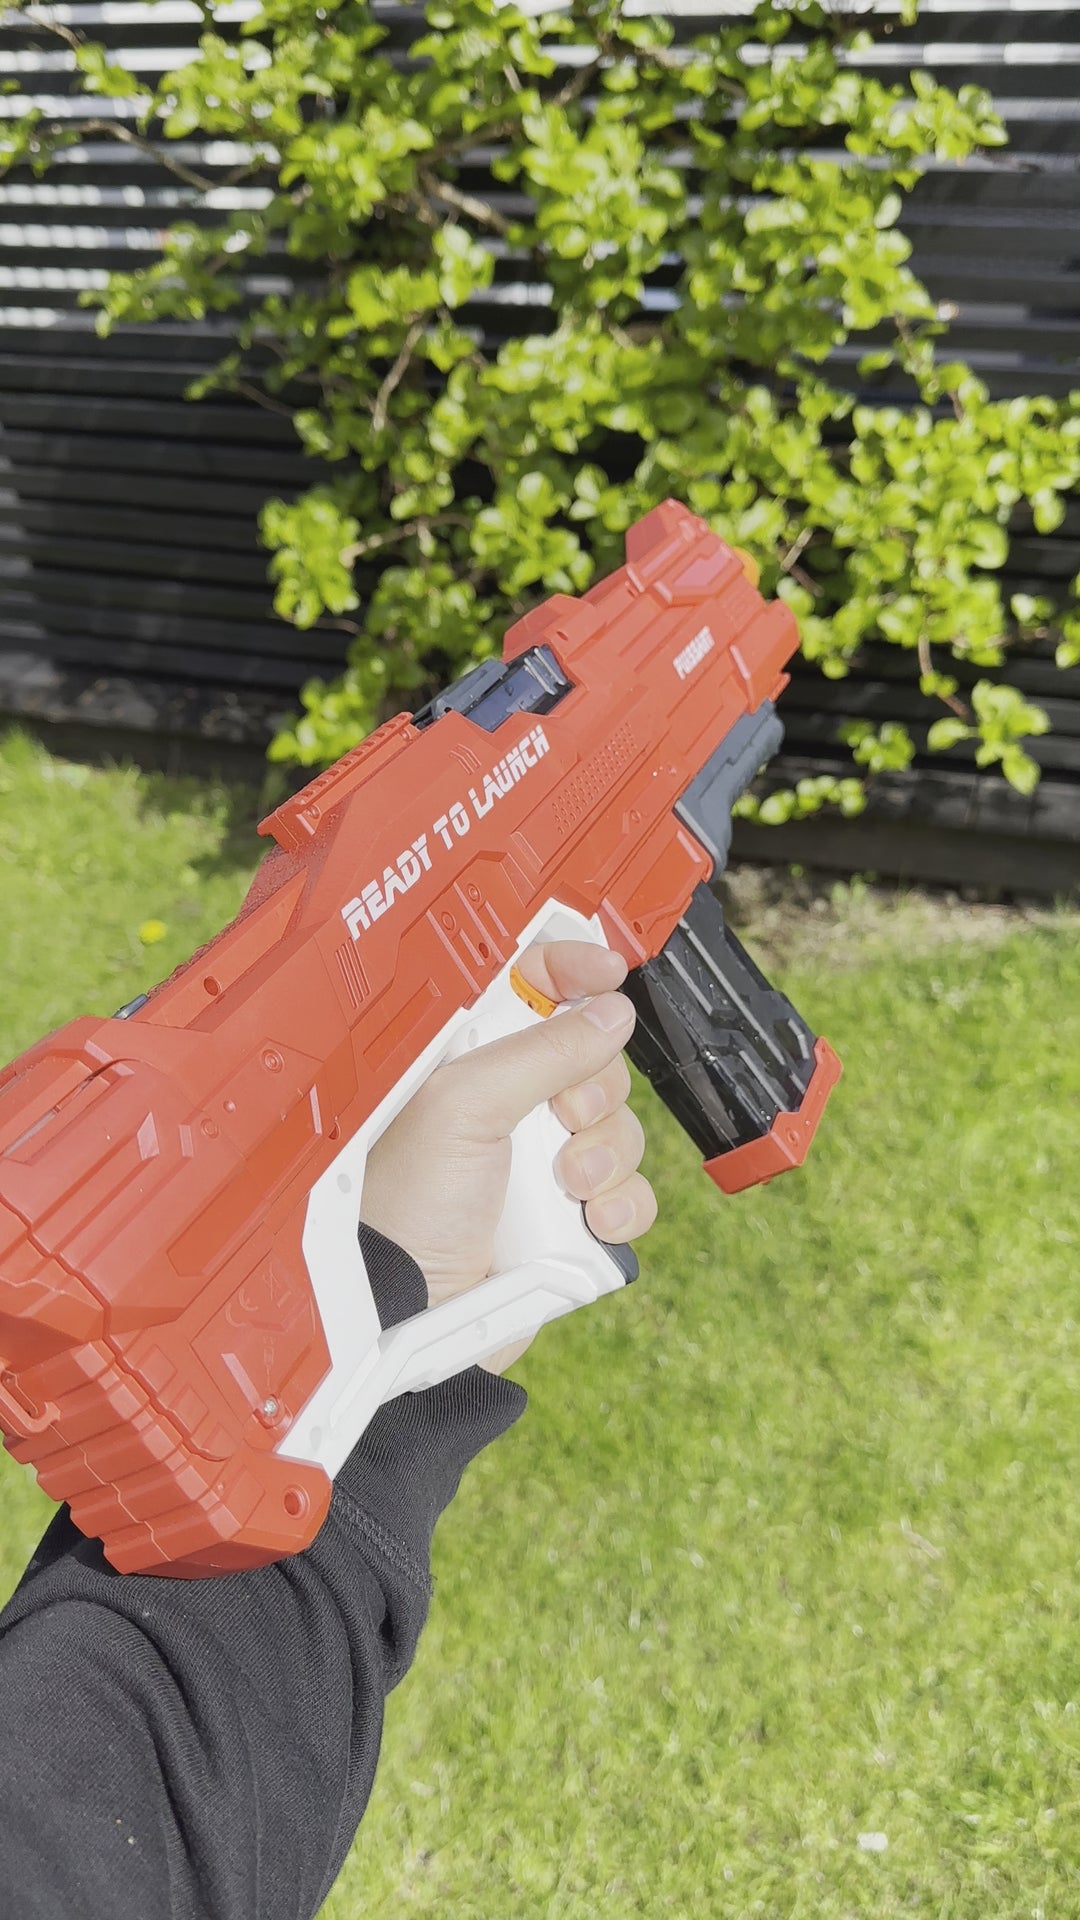 The Hydro Hammer - Electric Water Gun - Including battery and charger!